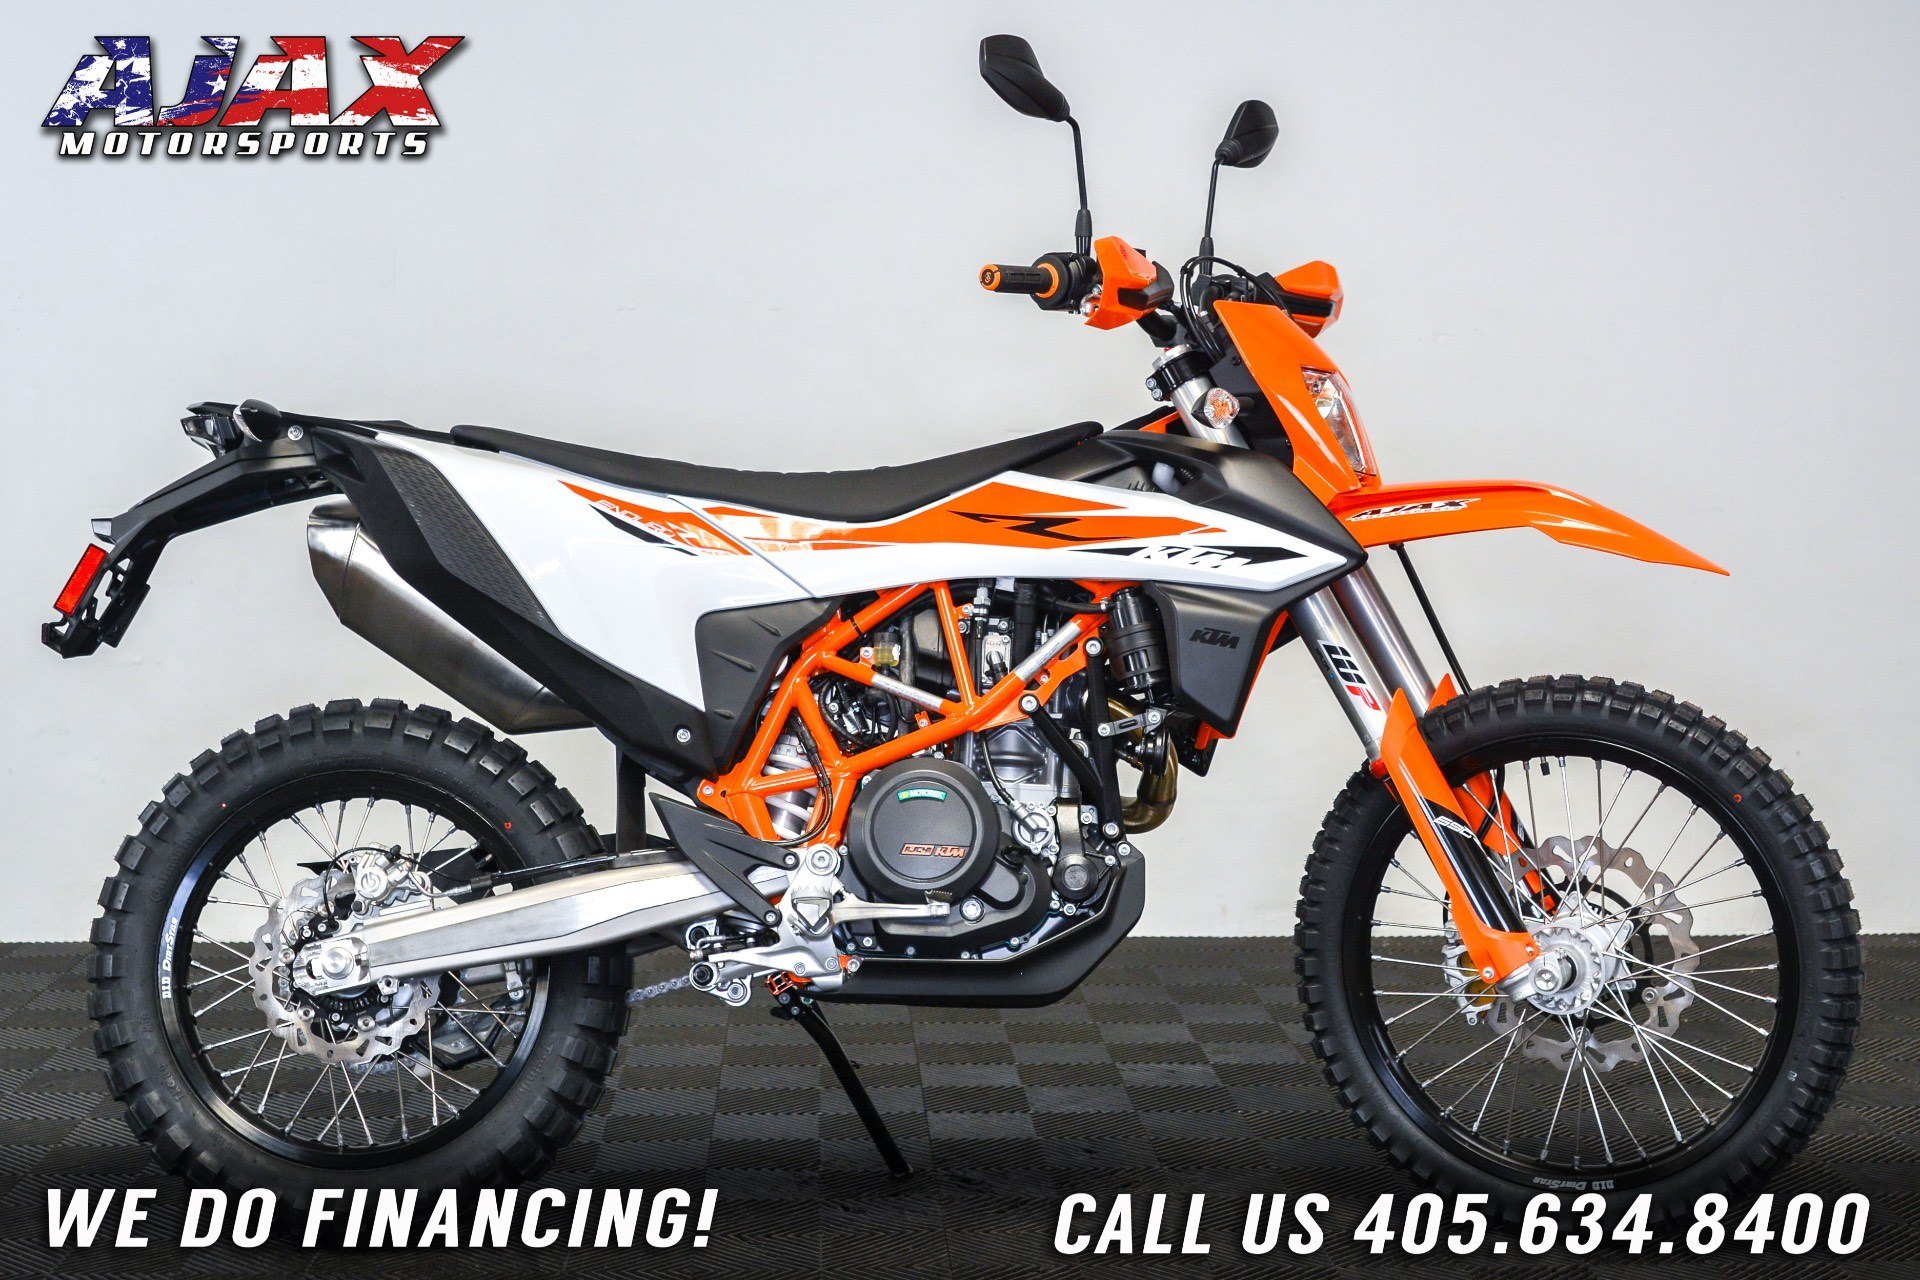 New 2020 Ktm 690 Enduro R Motorcycles In Oklahoma City Ok Stock Number 793281